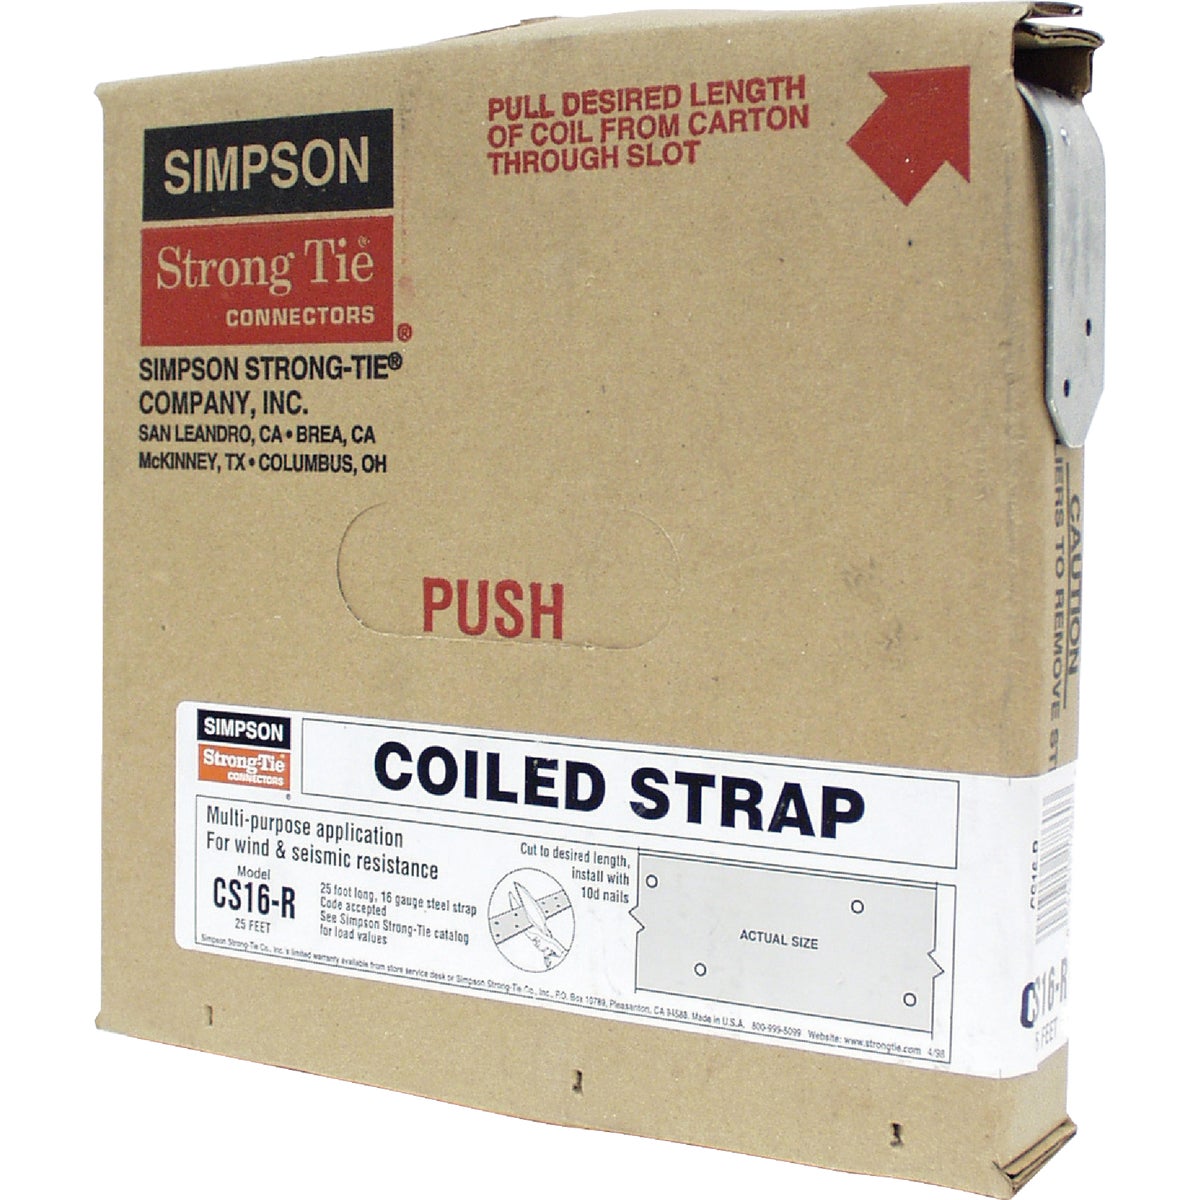 Item 105889, Simpson Strong-Tie straps and plates join and reinforce joints with simple